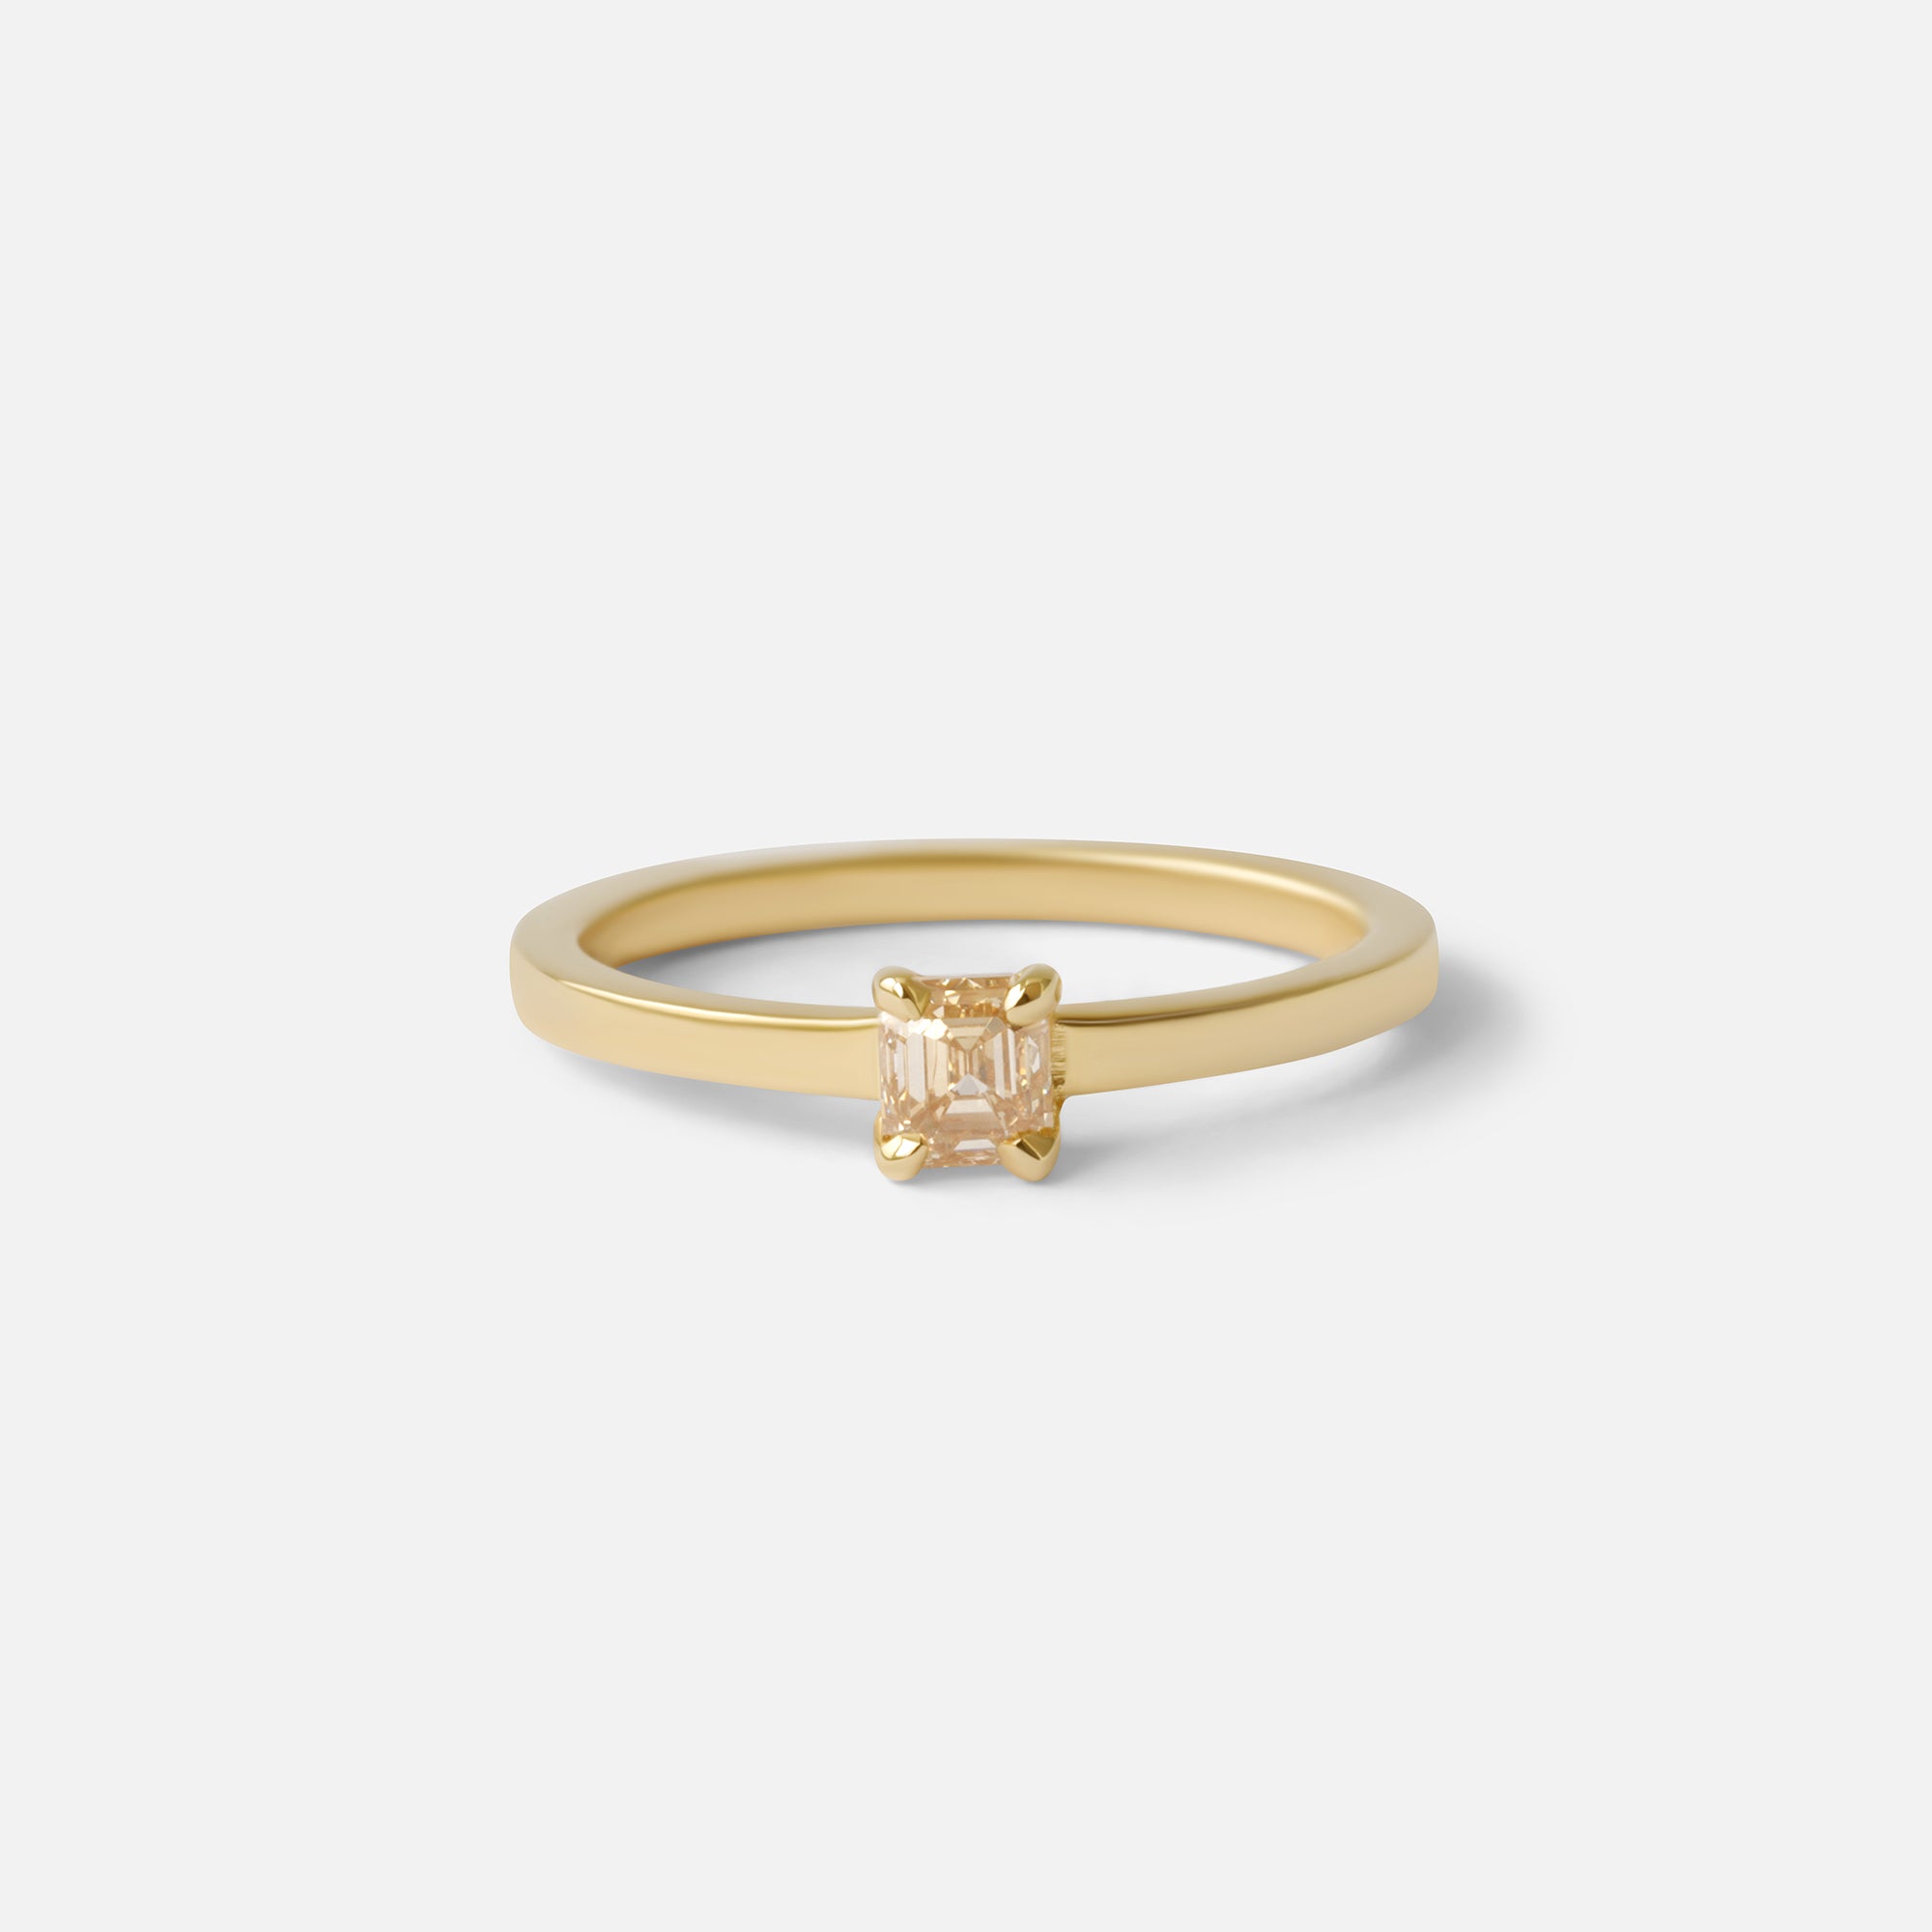 Solitaire Ring / Square Cut Diamond By Nishi